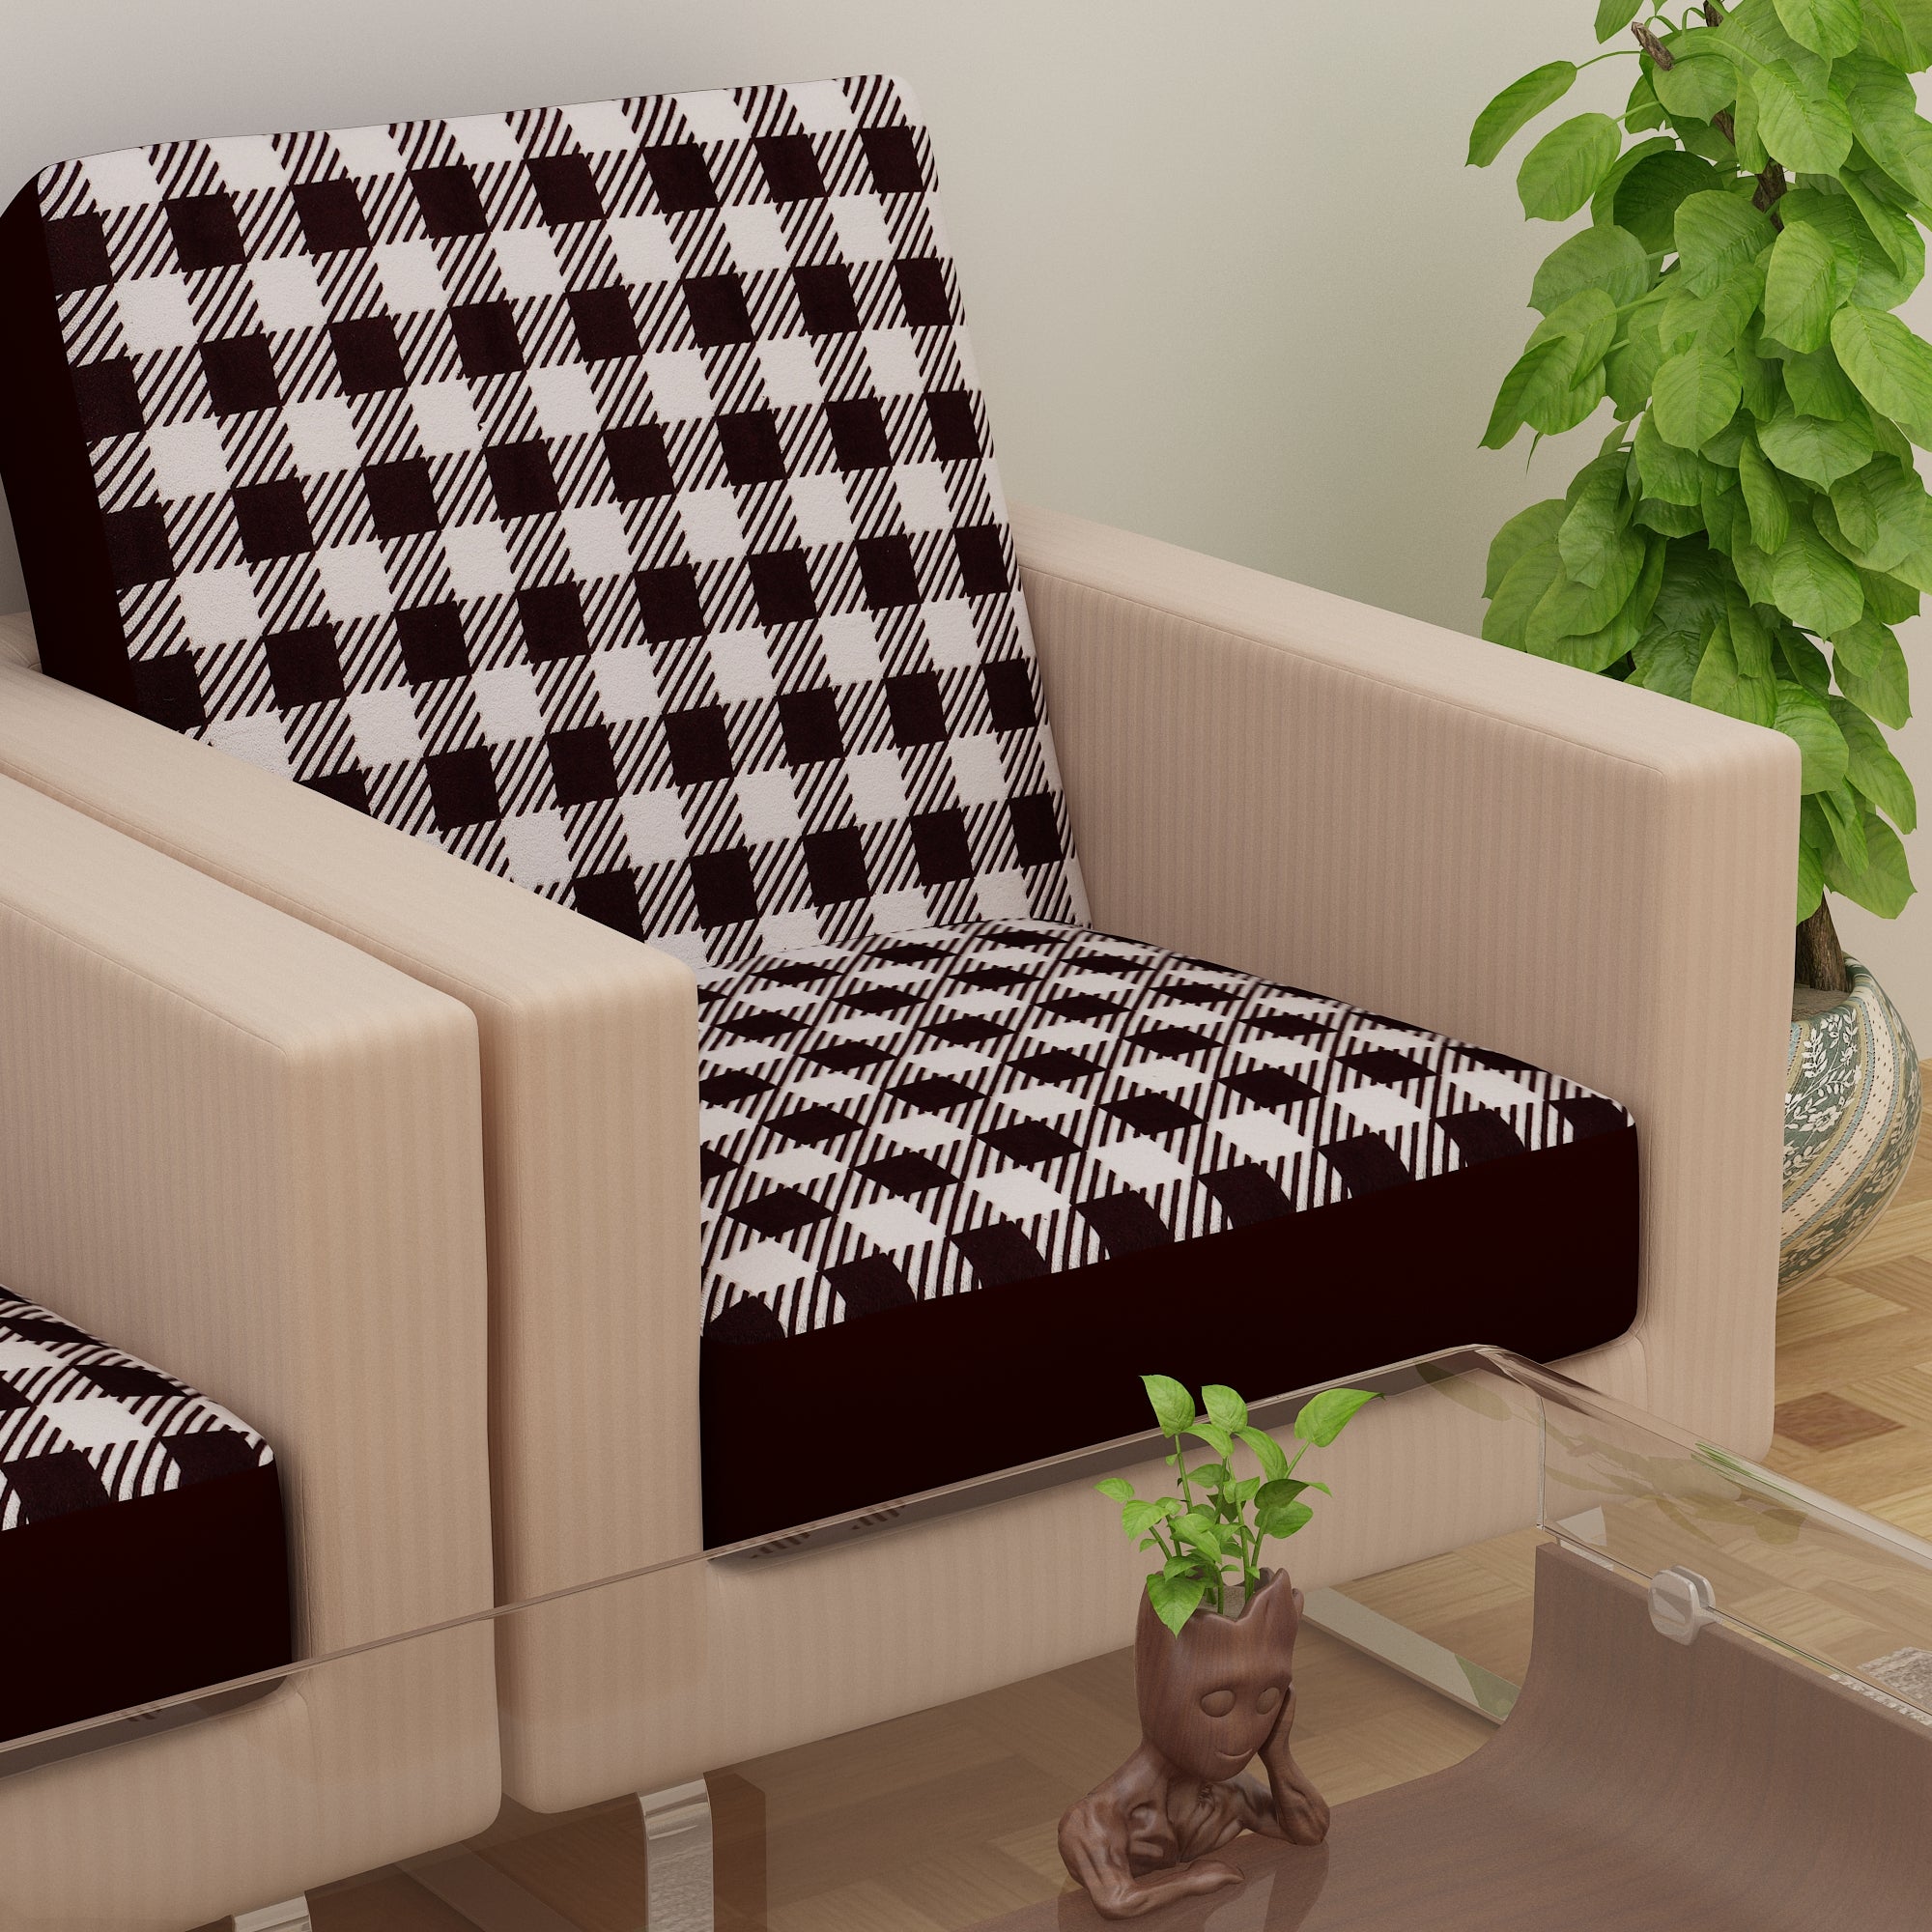 Waterproof Printed Sofa Seat Protector Cover with Stretchable Elastic, White Brown - Dream Care Furnishings Private Limited